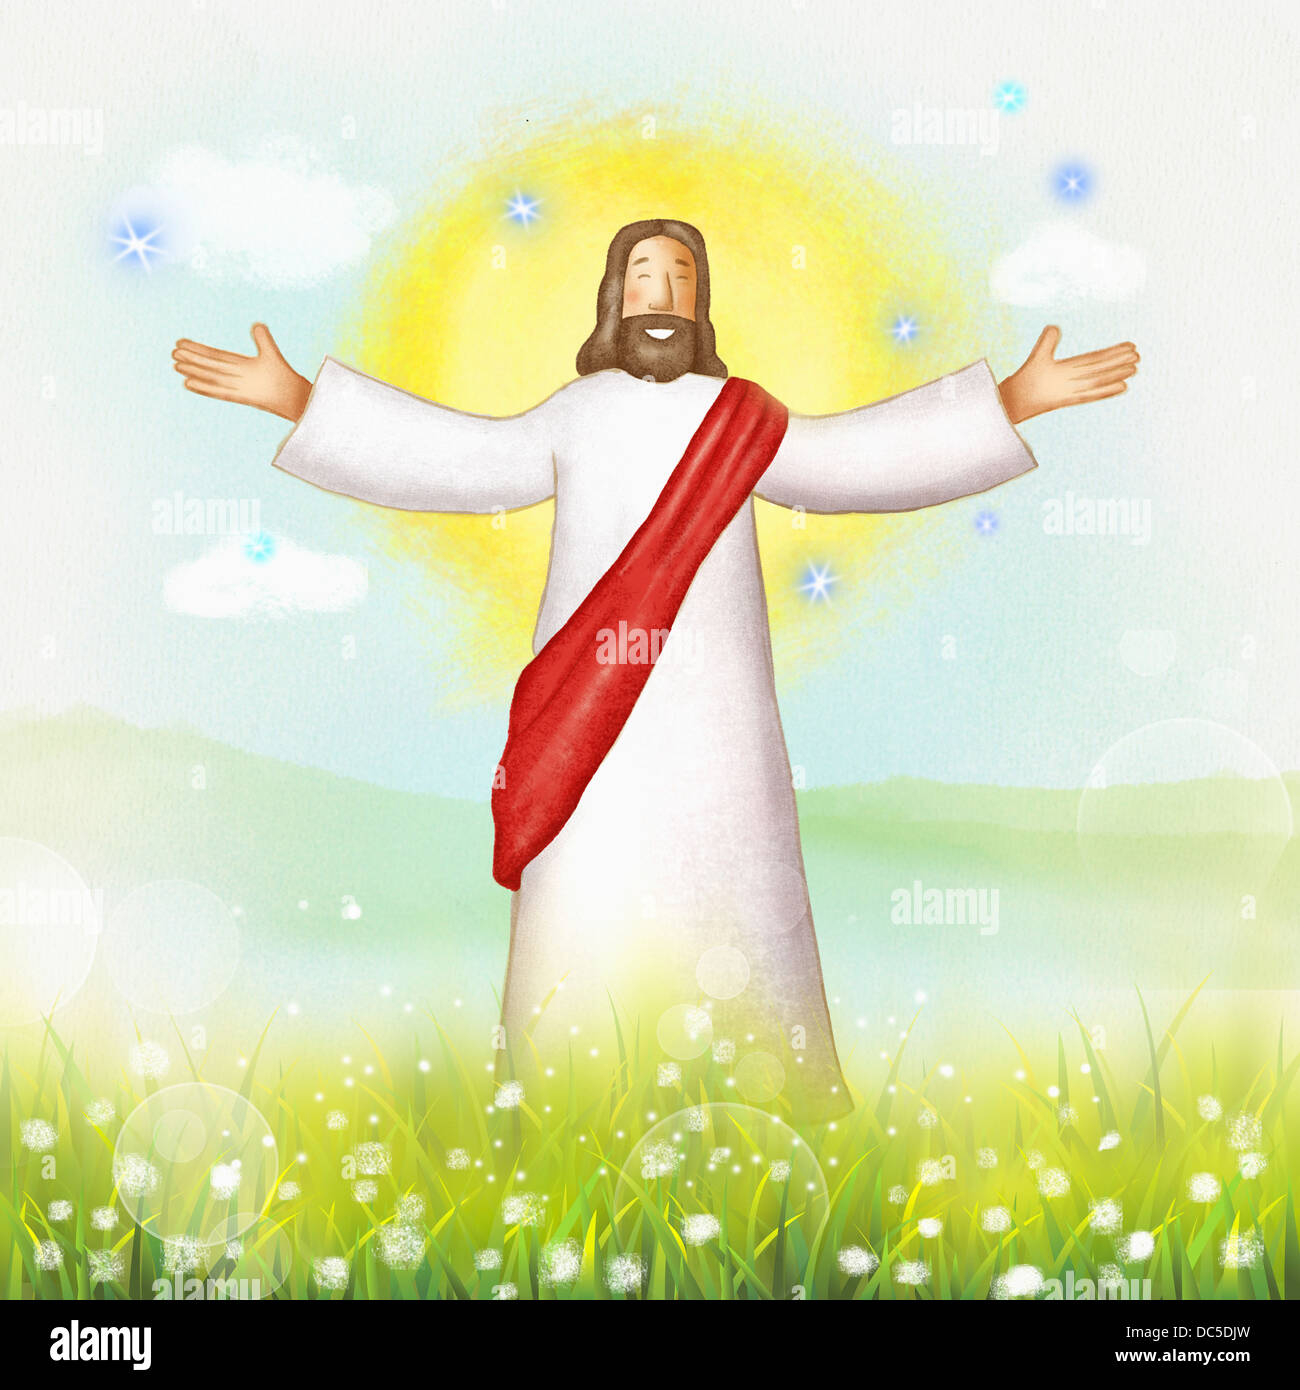 illustration of Jesus on grass and flowers Stock Photo